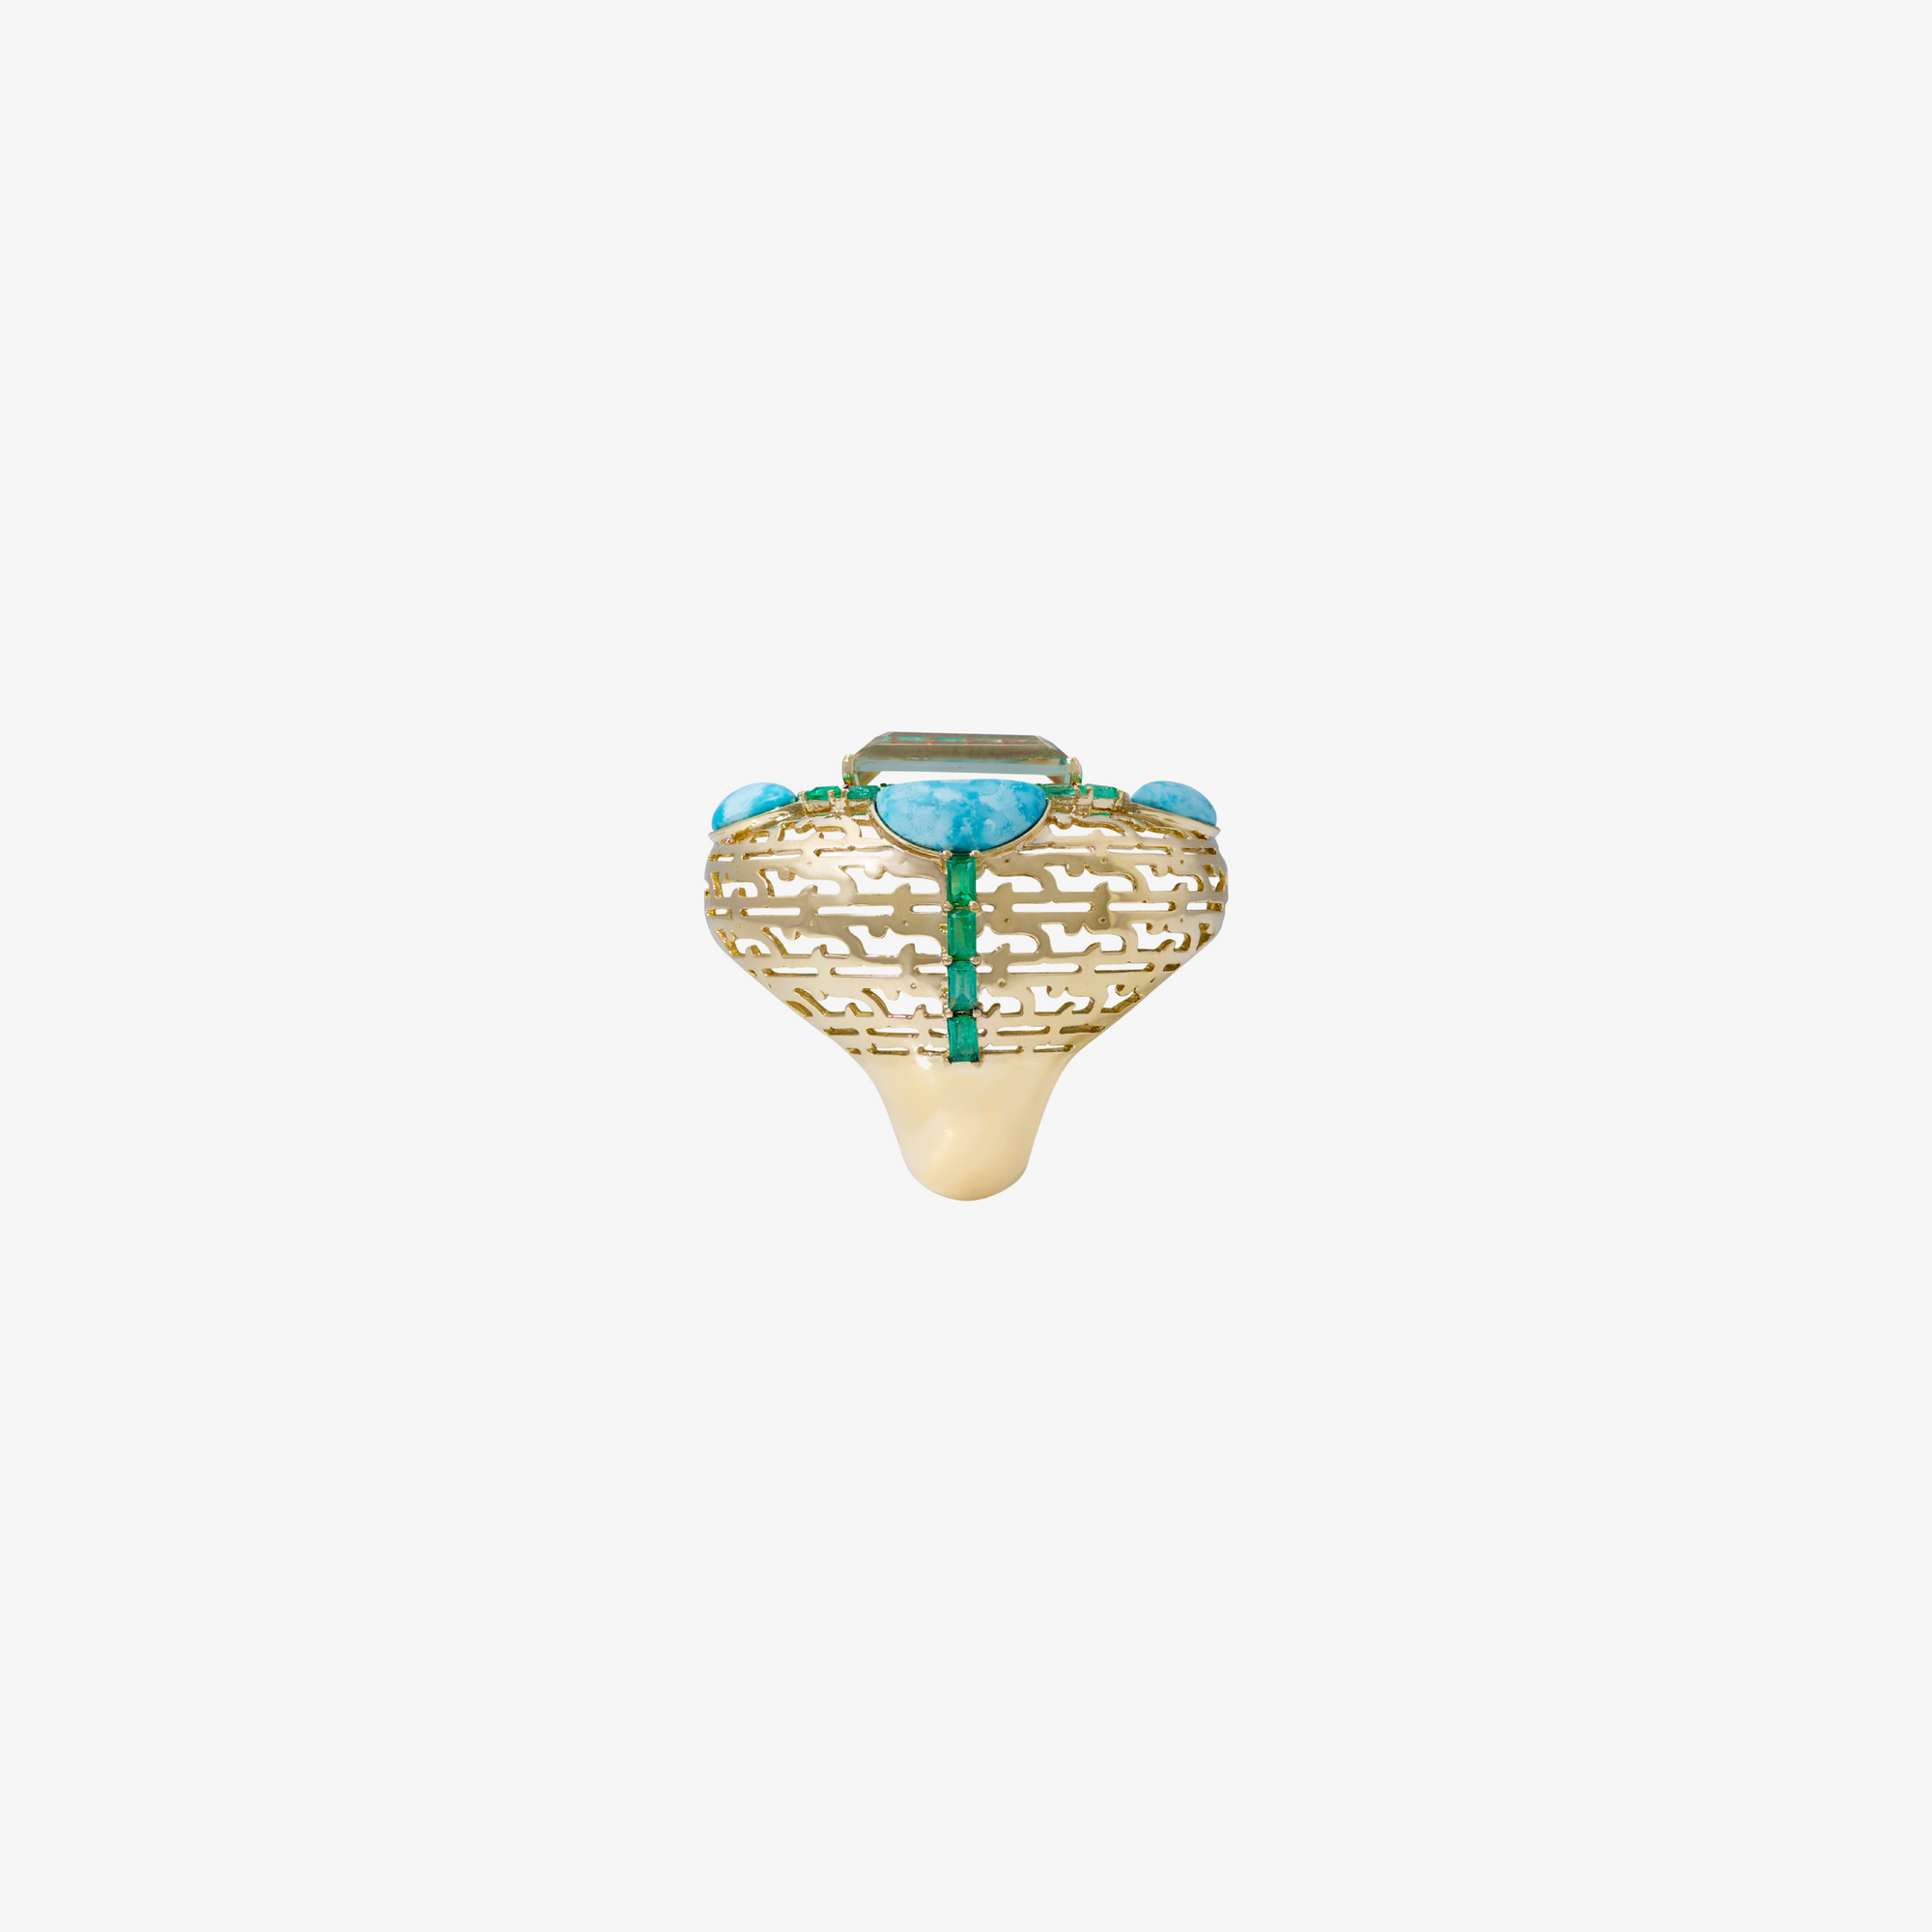 HAWA - Gold, Turquoise, Amethyst & Emerald Ring (Oval Shape)